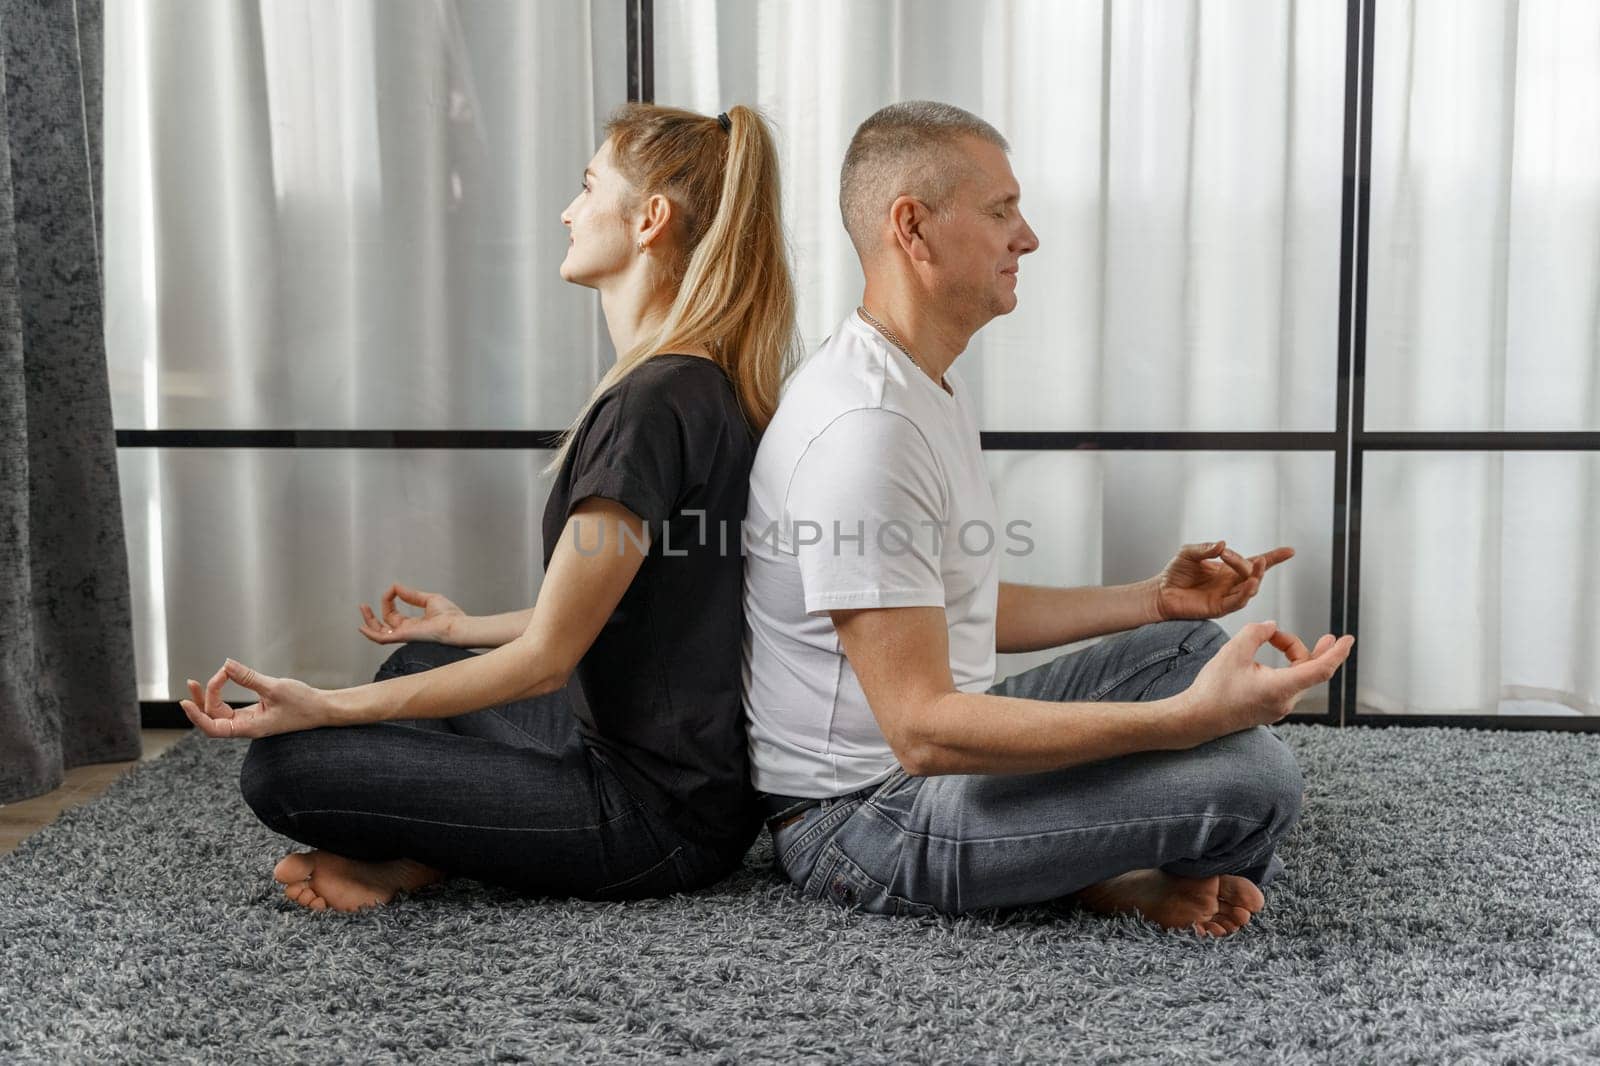 A man and a woman sit back to back, practice yoga and meditate for relaxation and balance of life in a room at home. by Sd28DimoN_1976